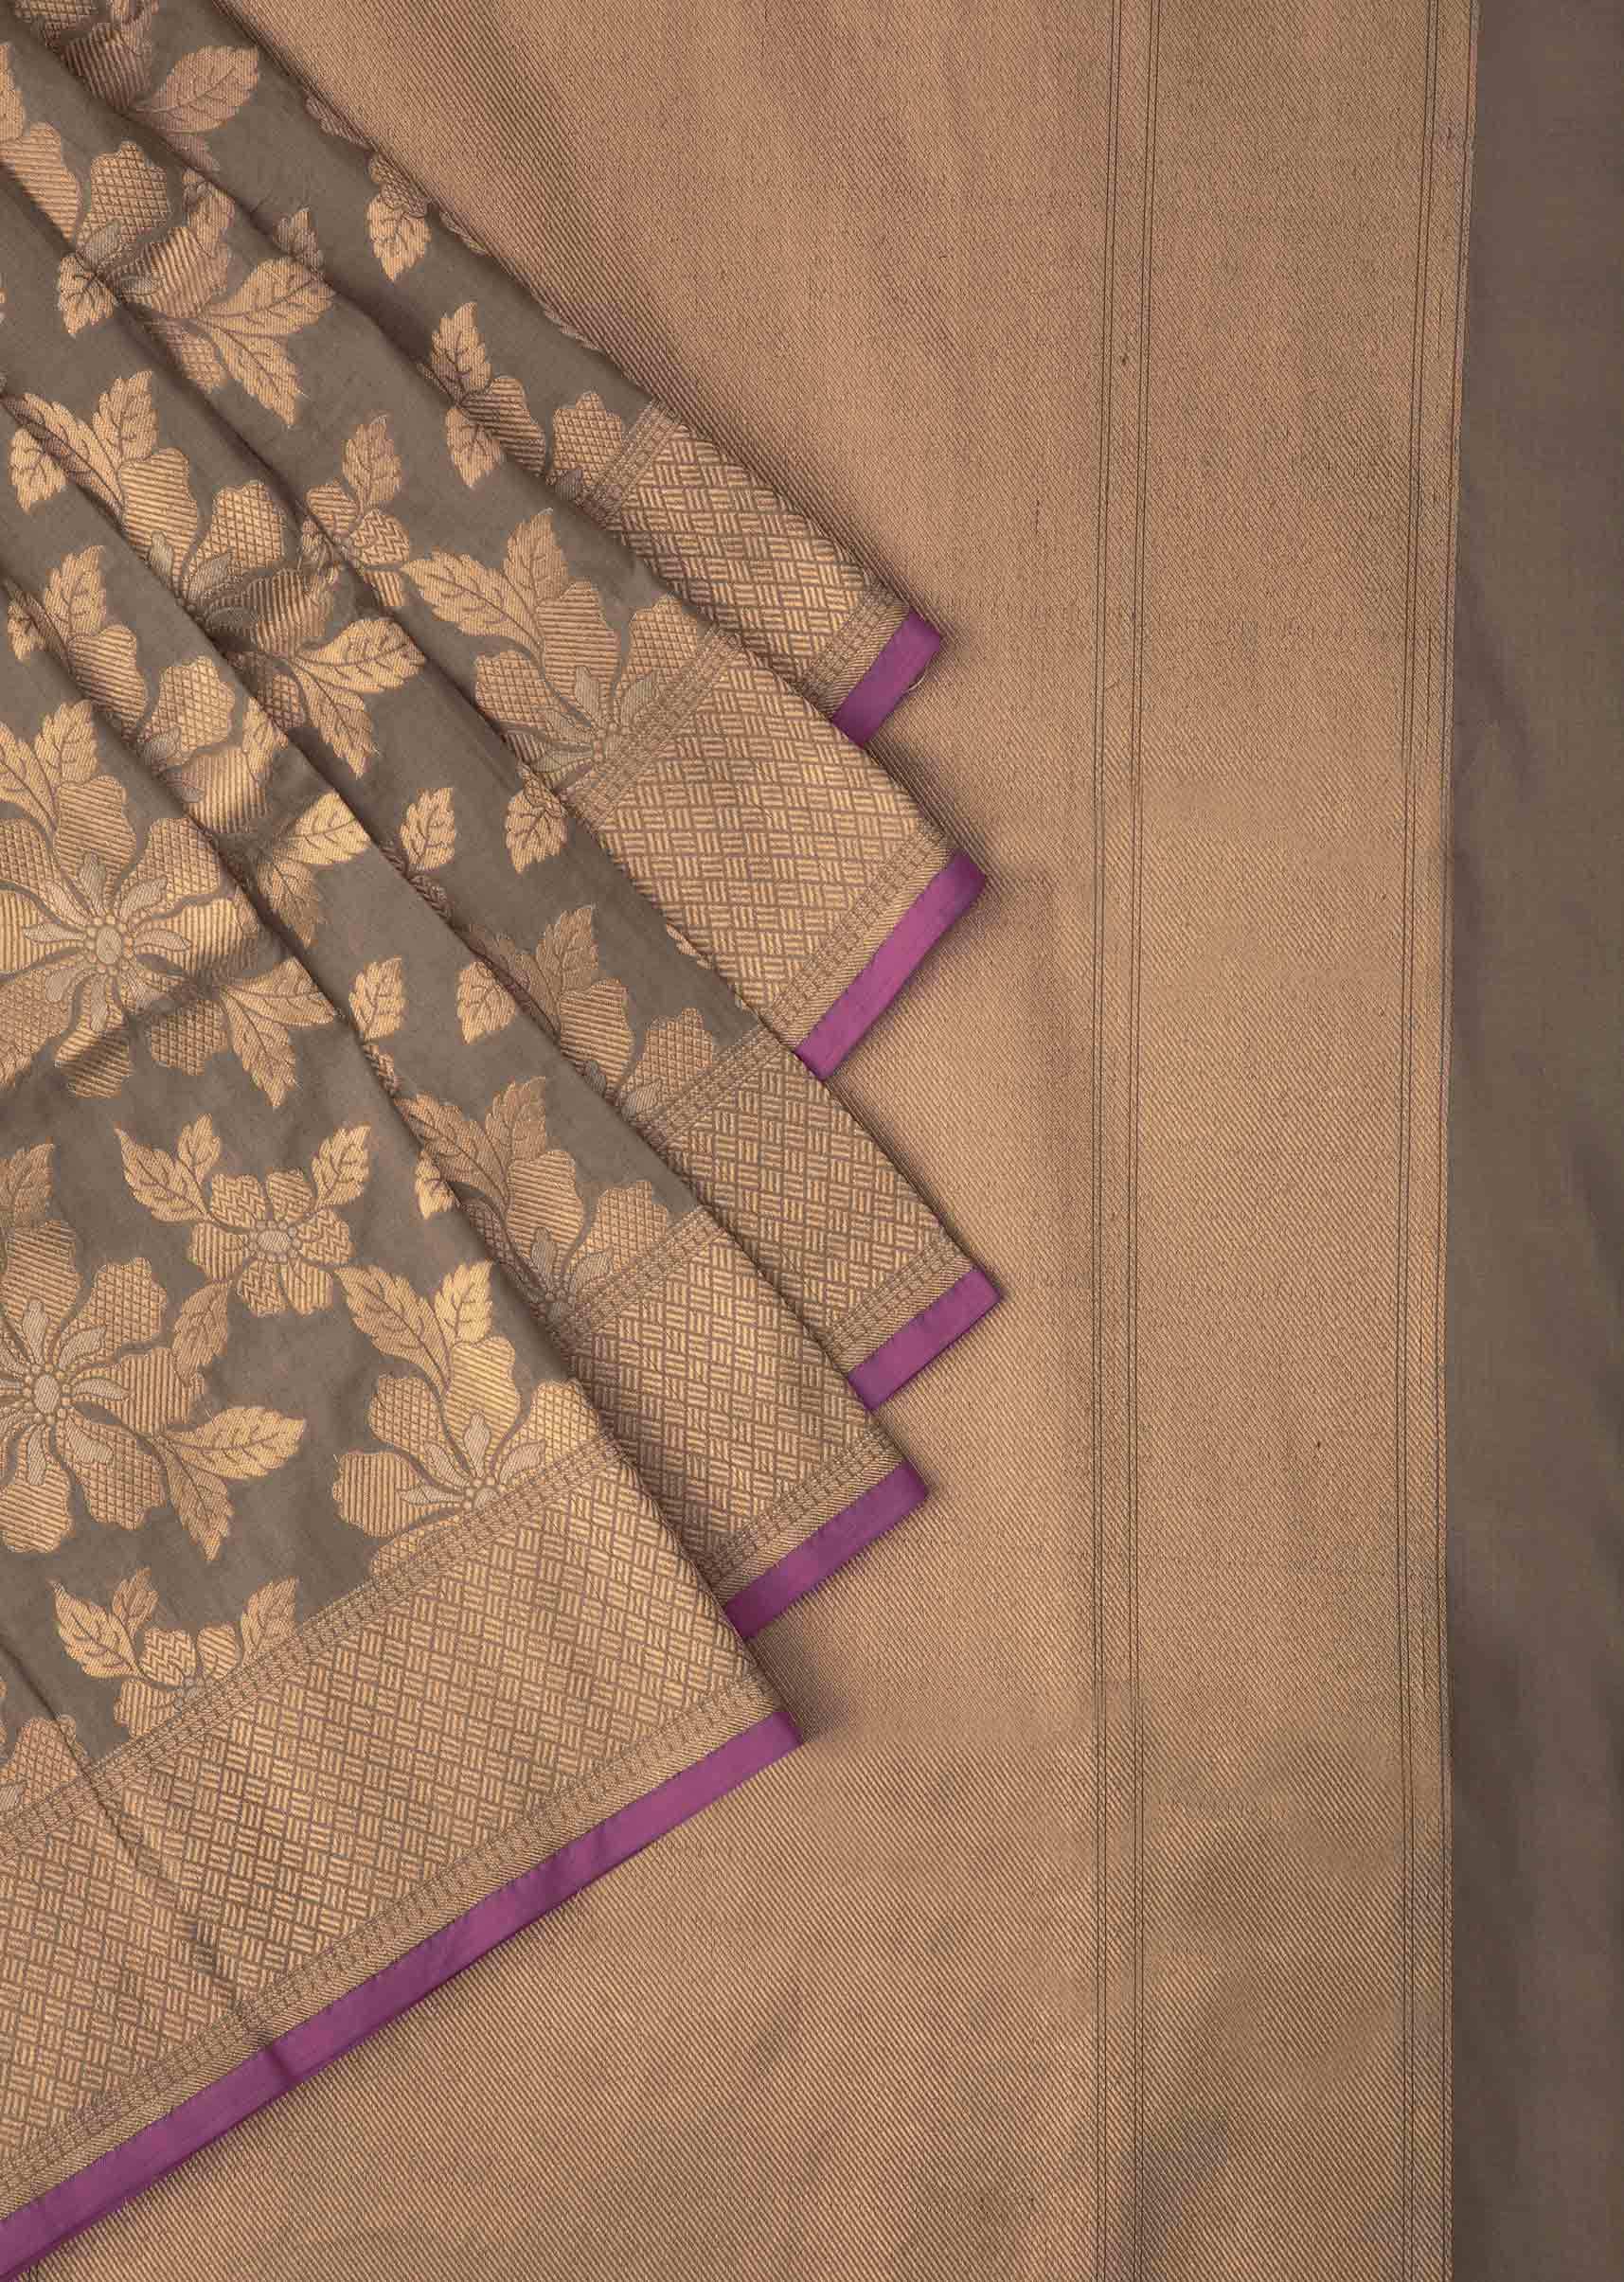 Ash grey saree in chanderi silk with weaved jaal in floral motif all over